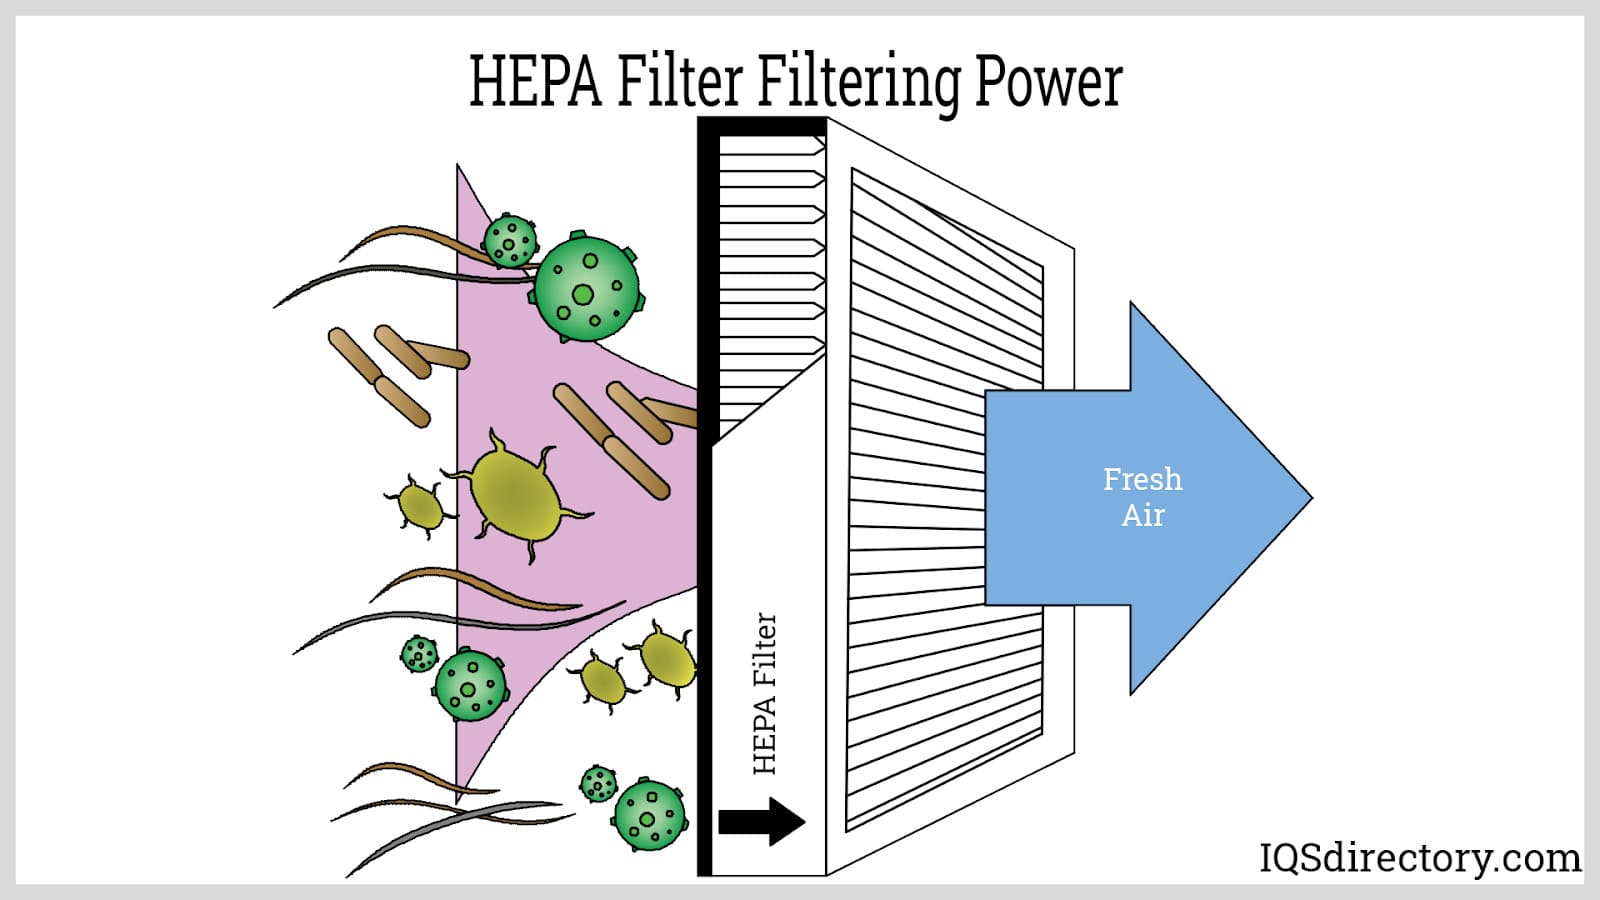 HEPA Air Filters Classifications, Design, Uses, and Testing